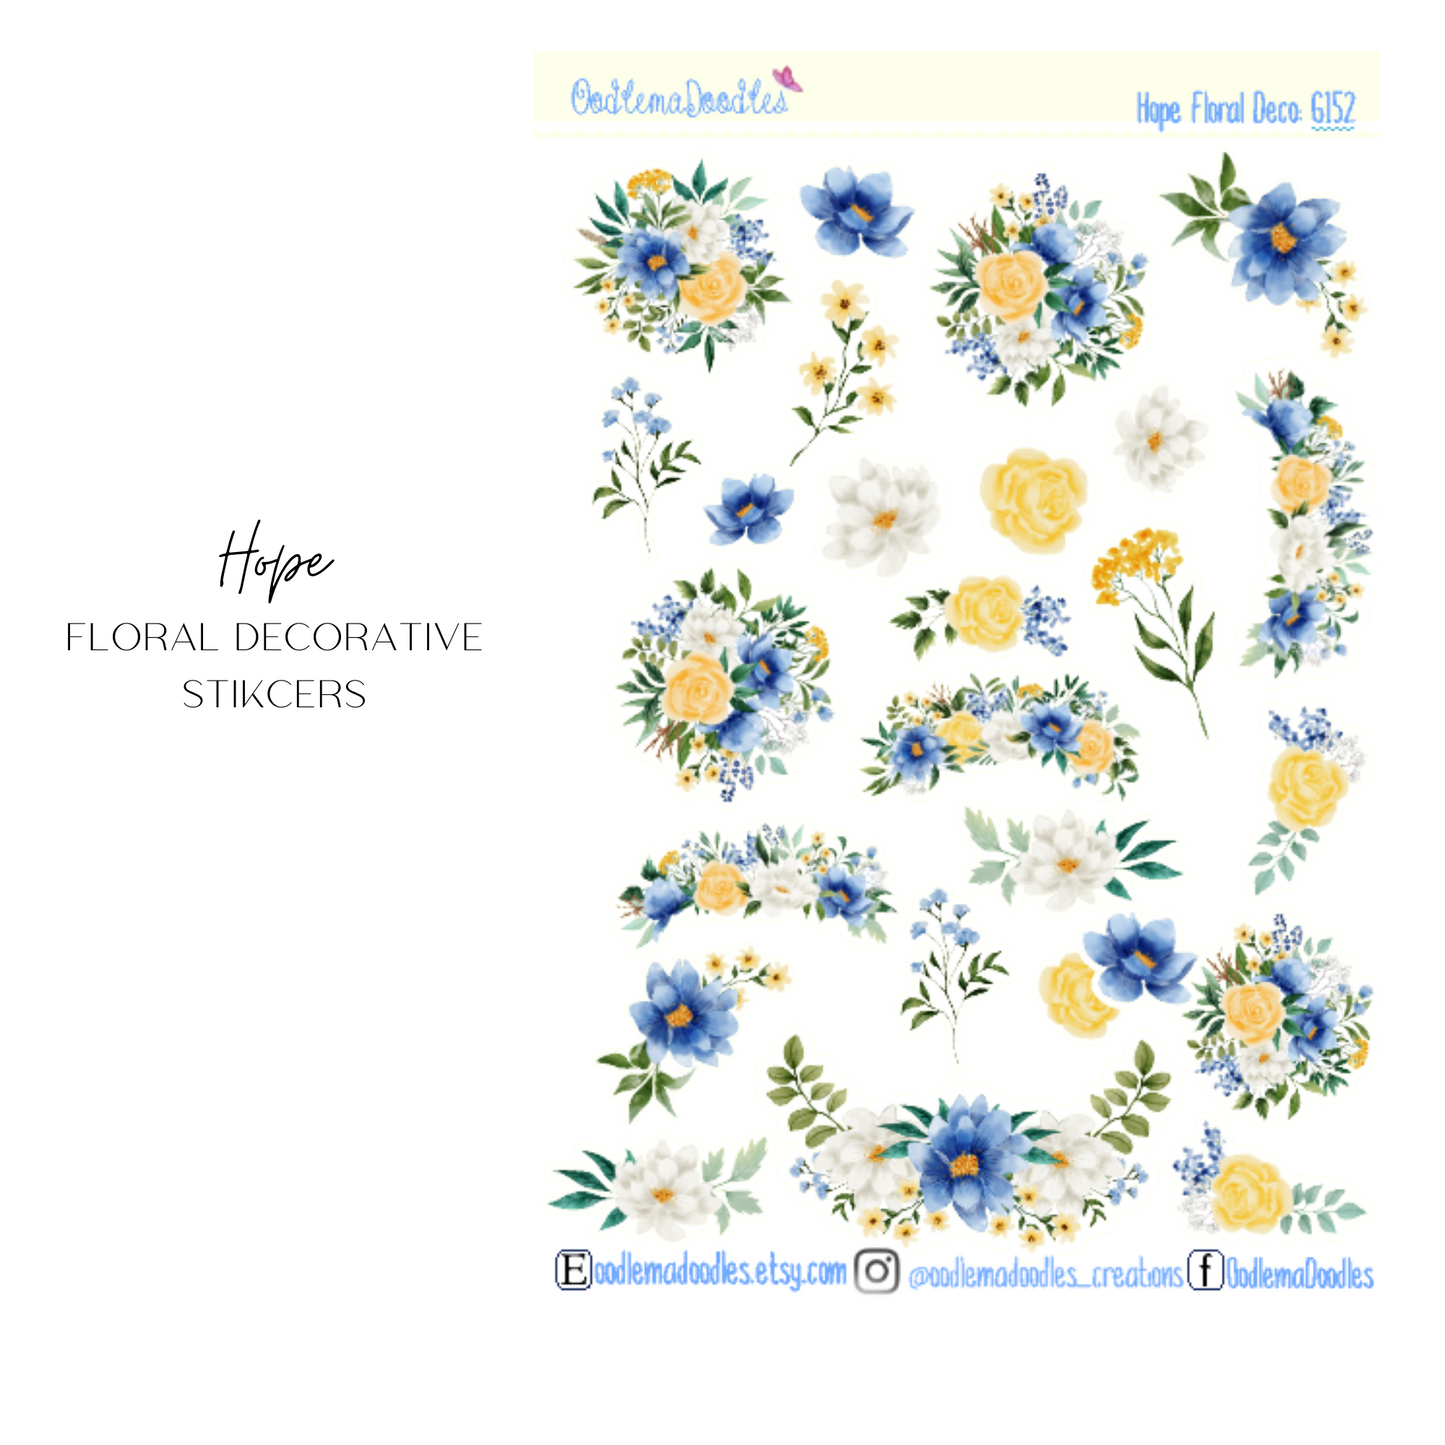 Hope Floral Decorative Stickers